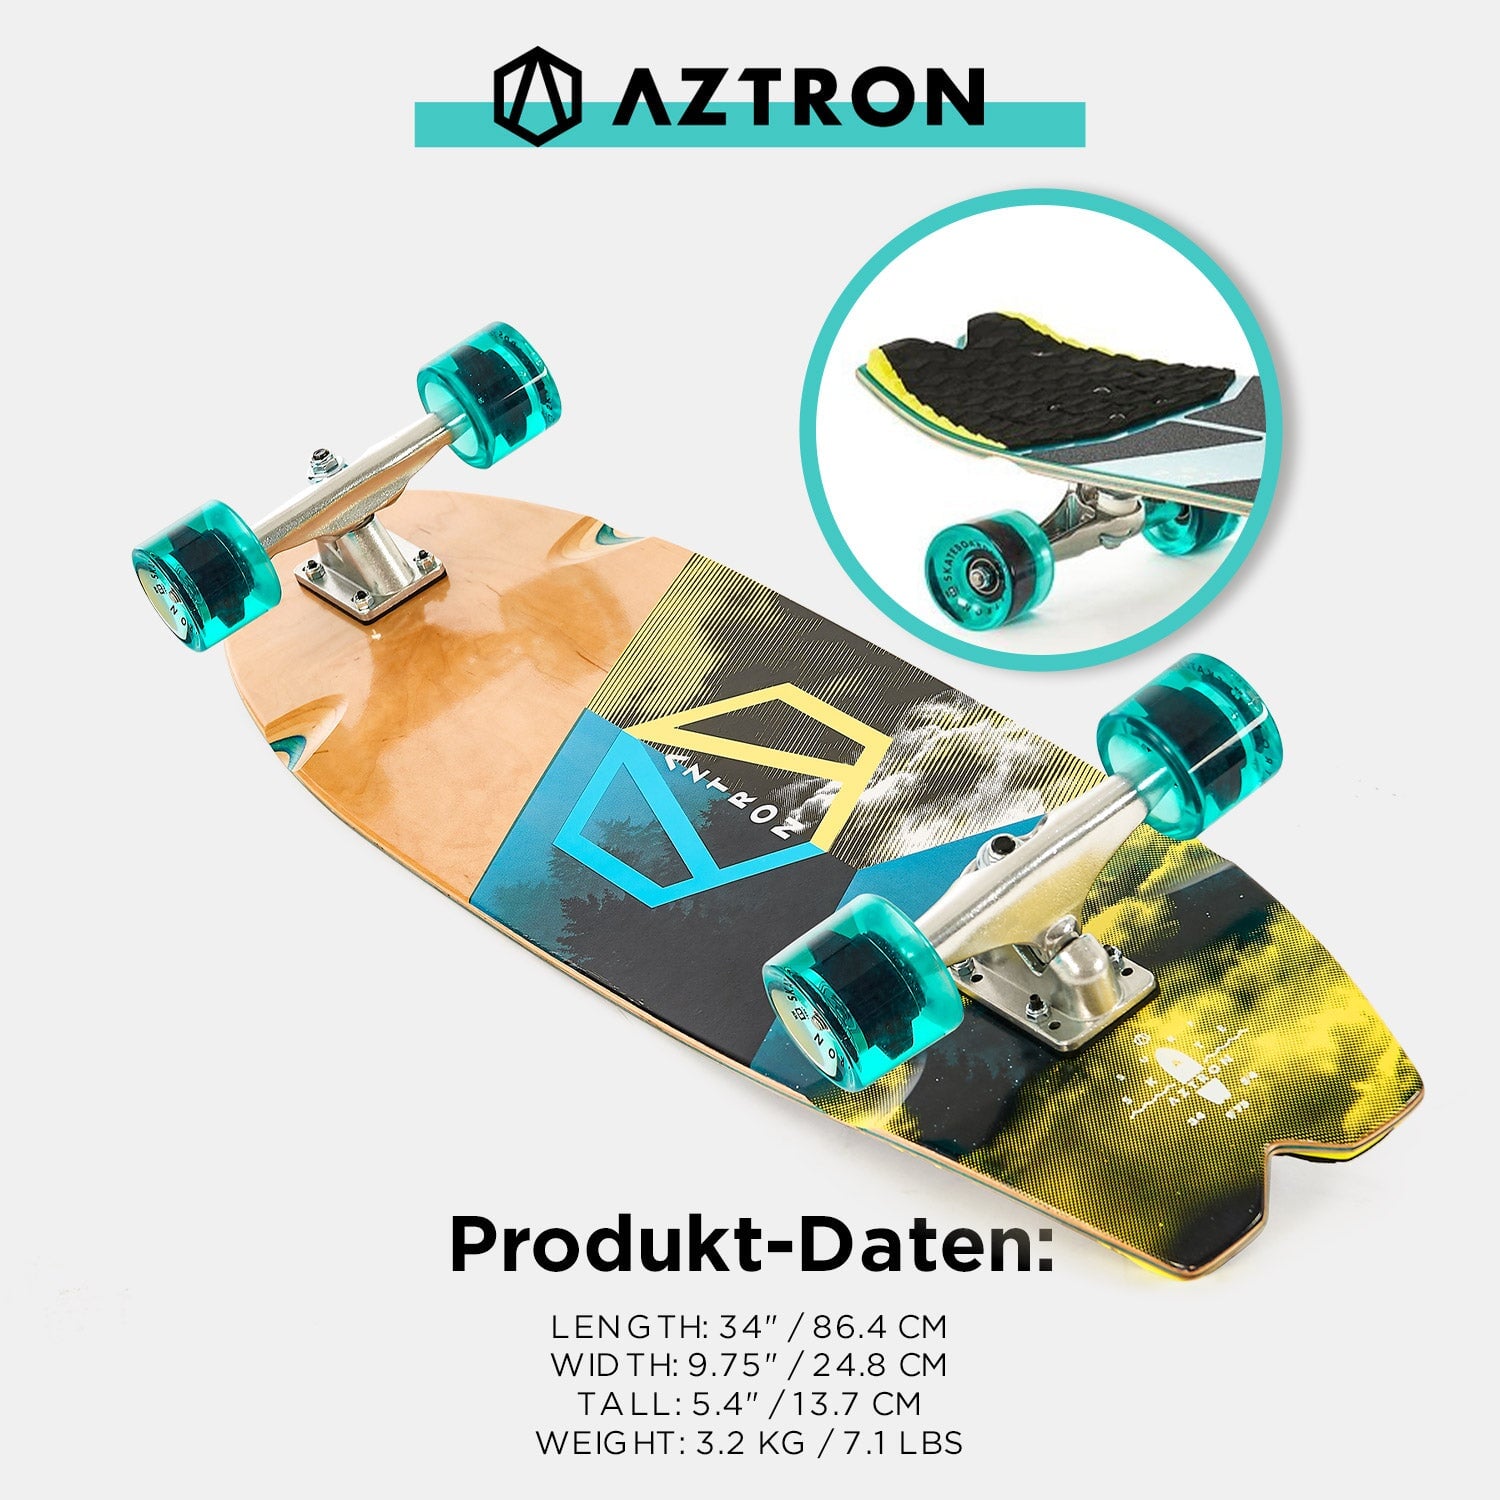 Aztron FOREST 34 Surfskate Board